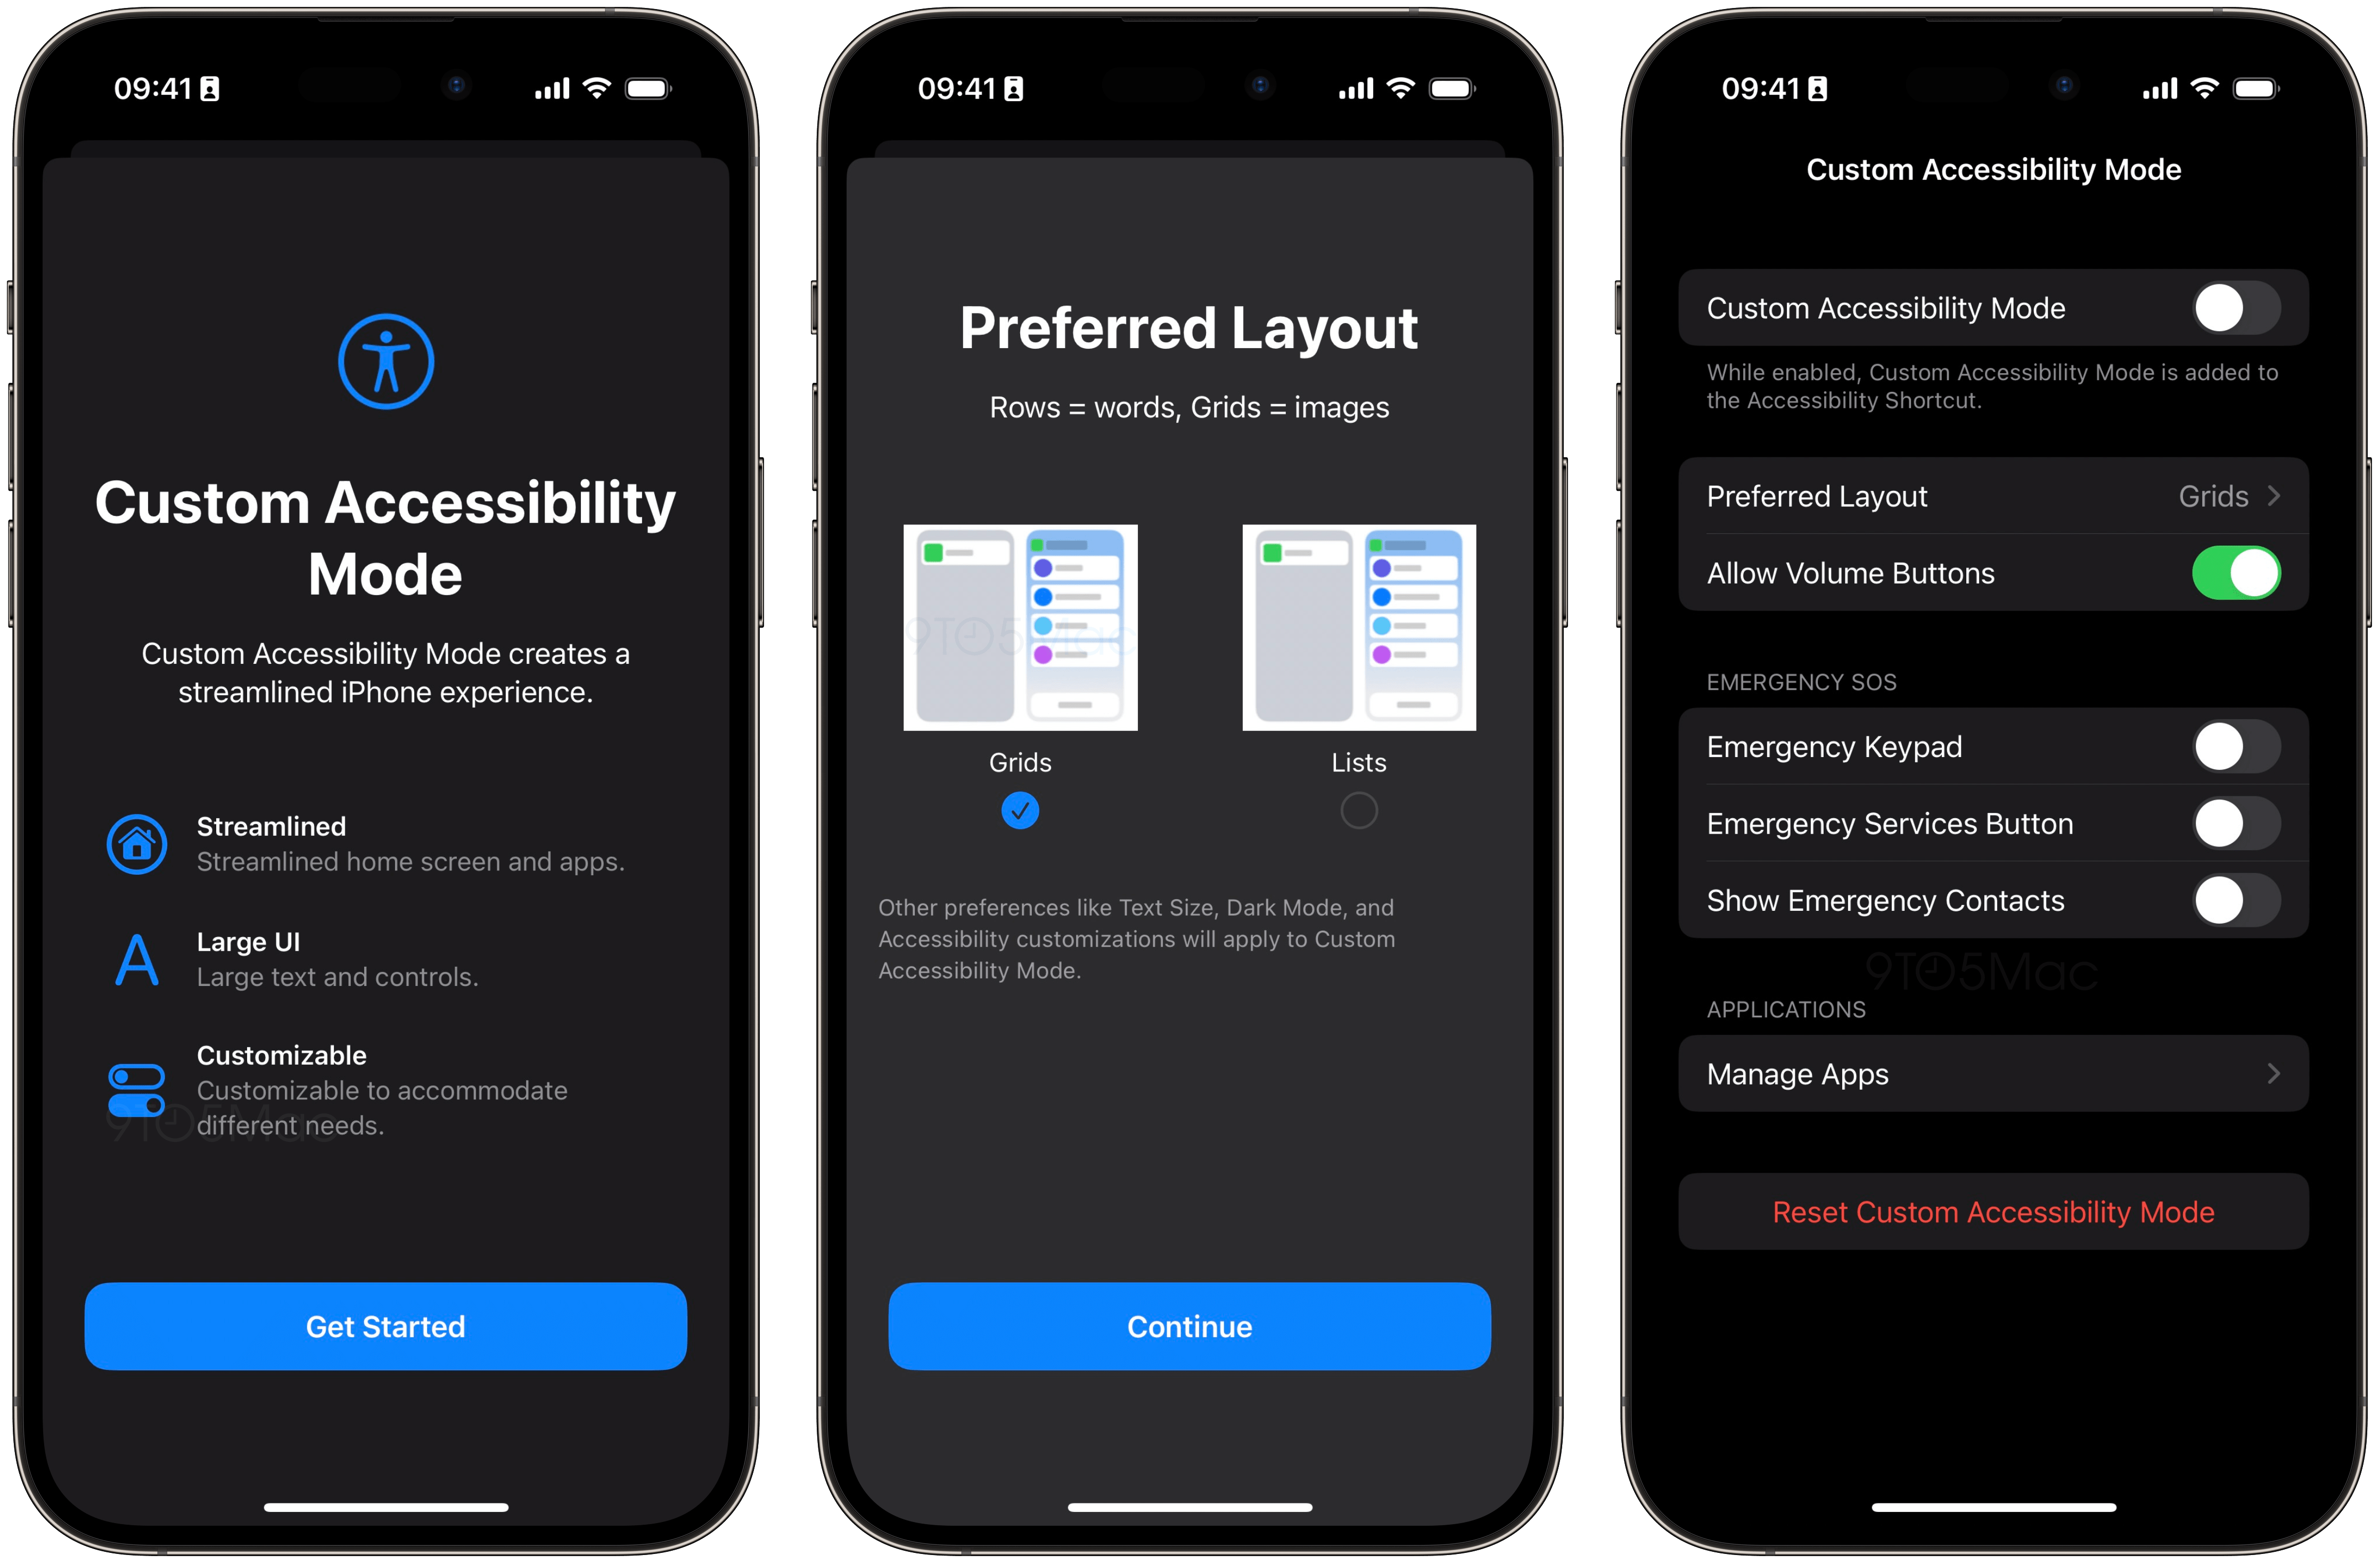 iOS 16.2 Custom Access Mode with a Streamlined Experience for iPhone and iPad